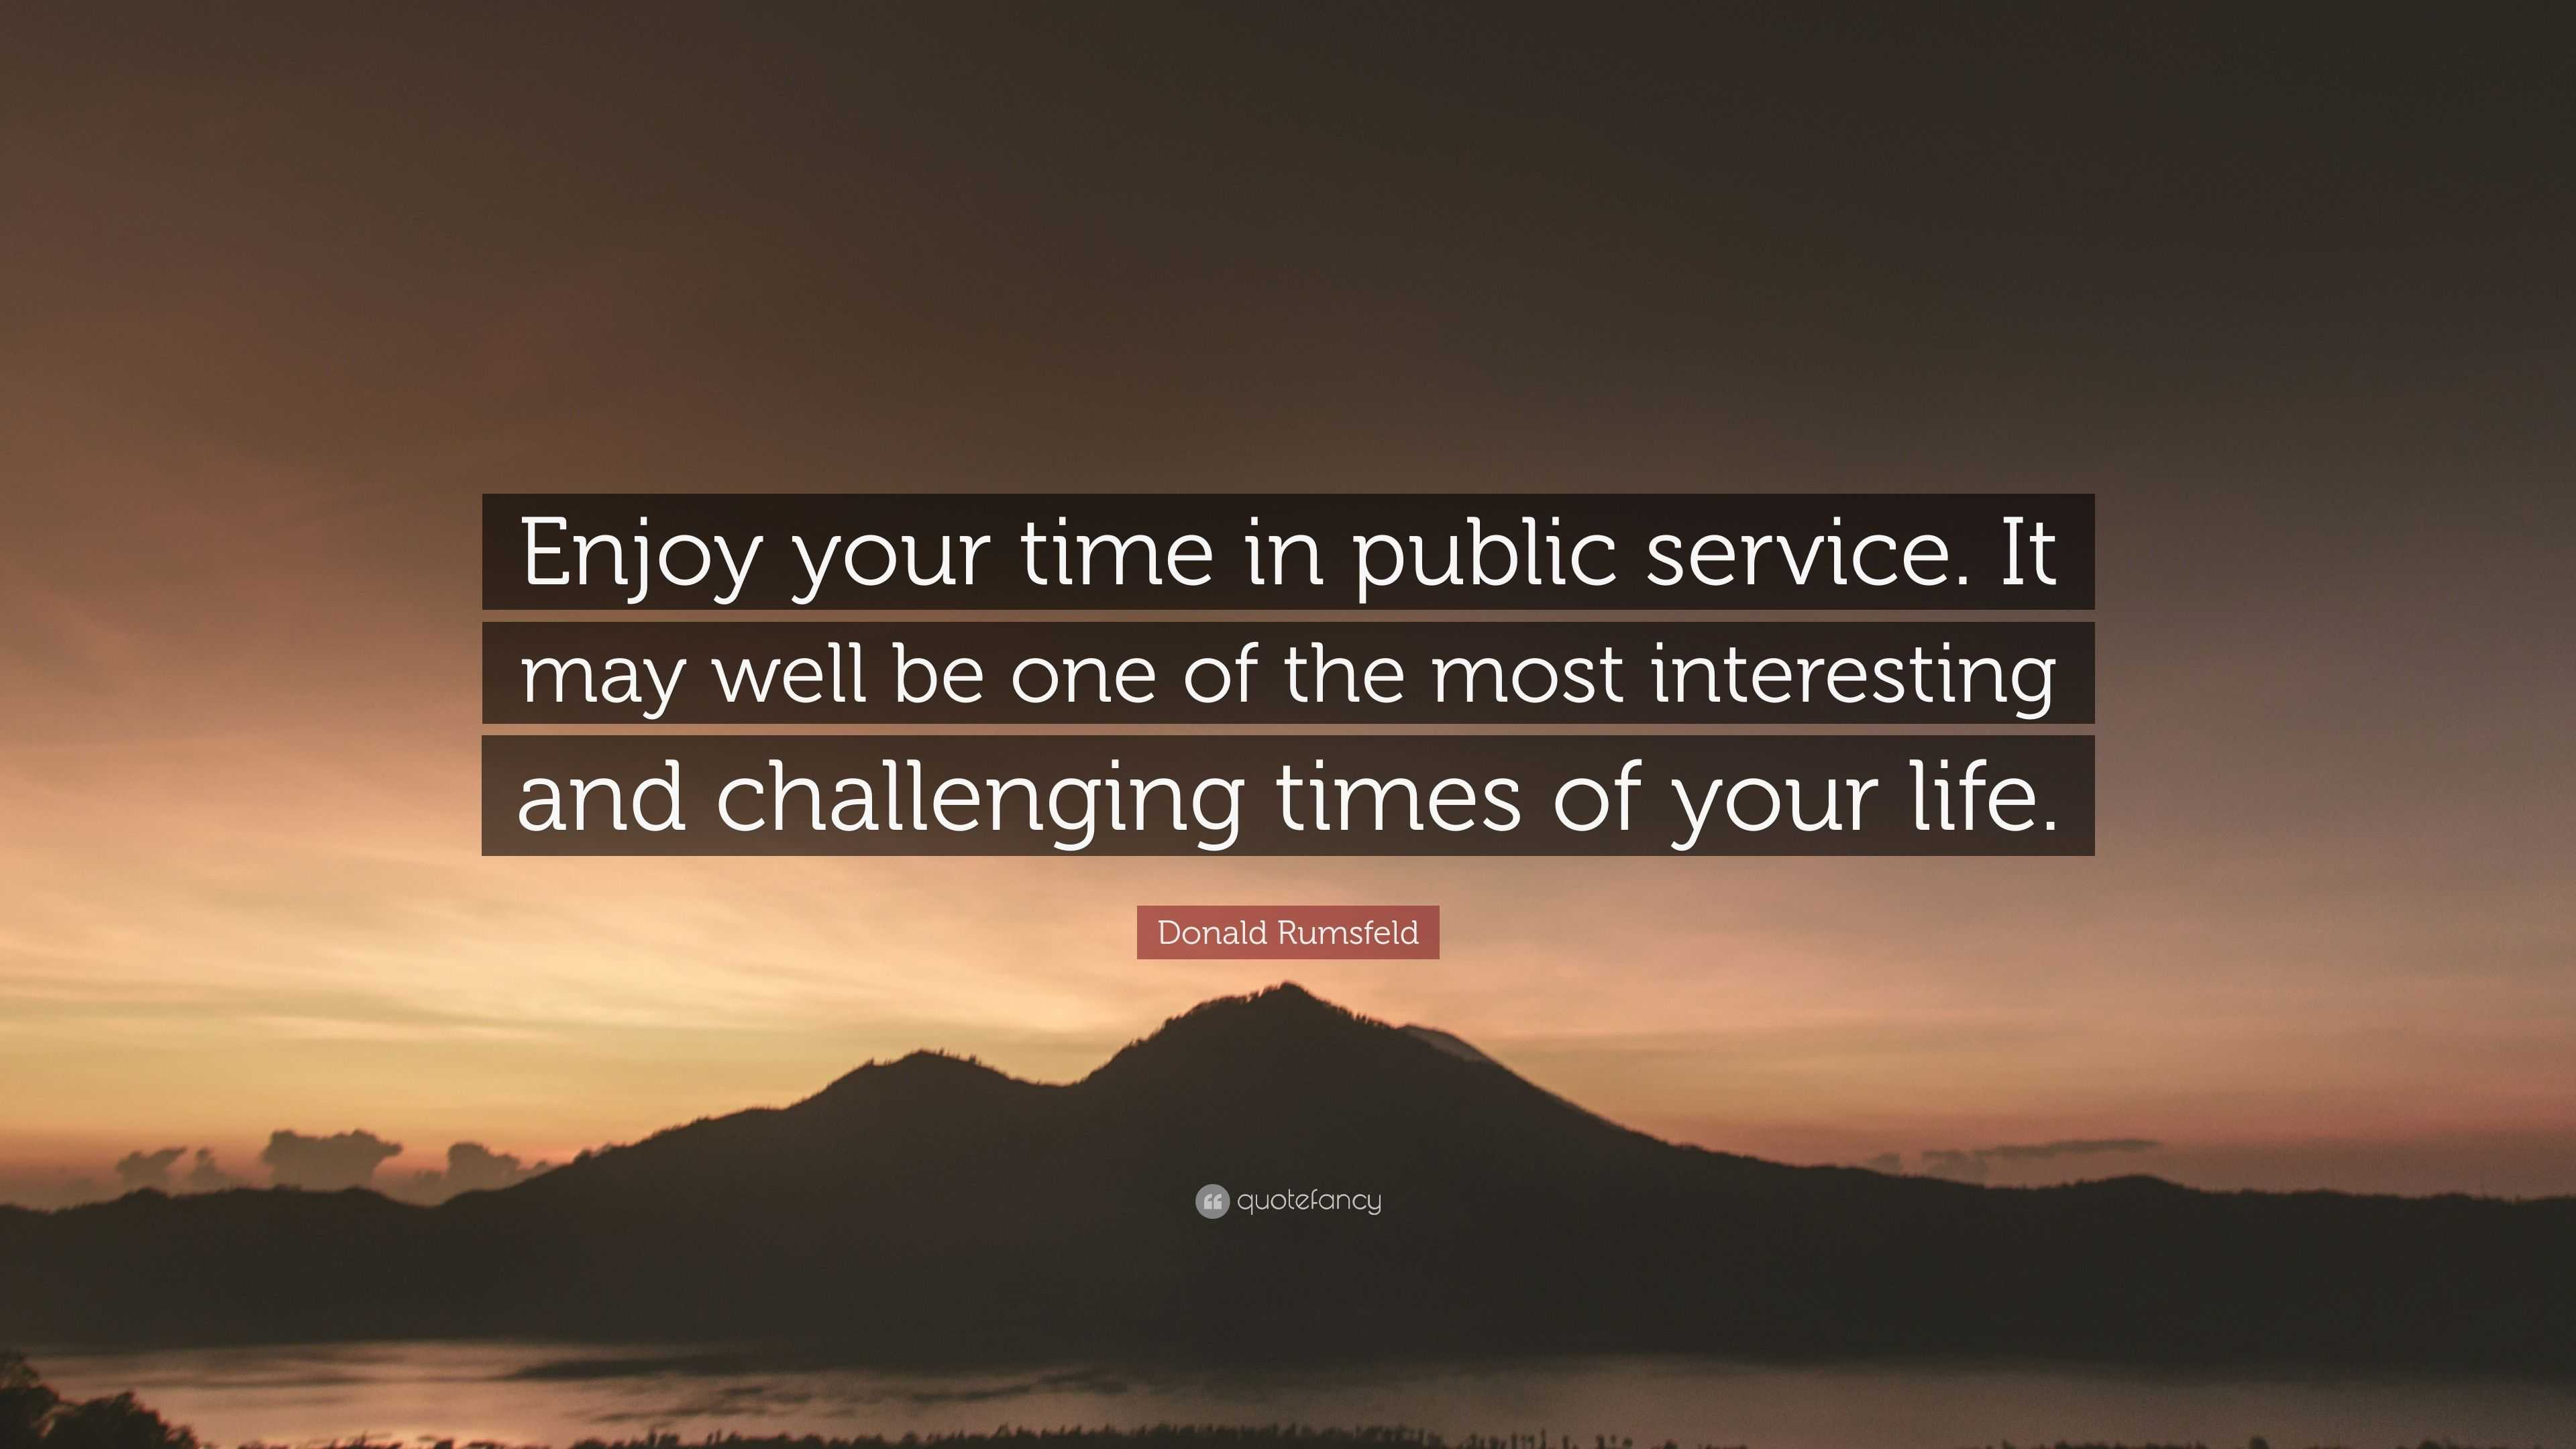 time of your life quotes donald rumsfeld quote u201cenjoy your time in public service it may